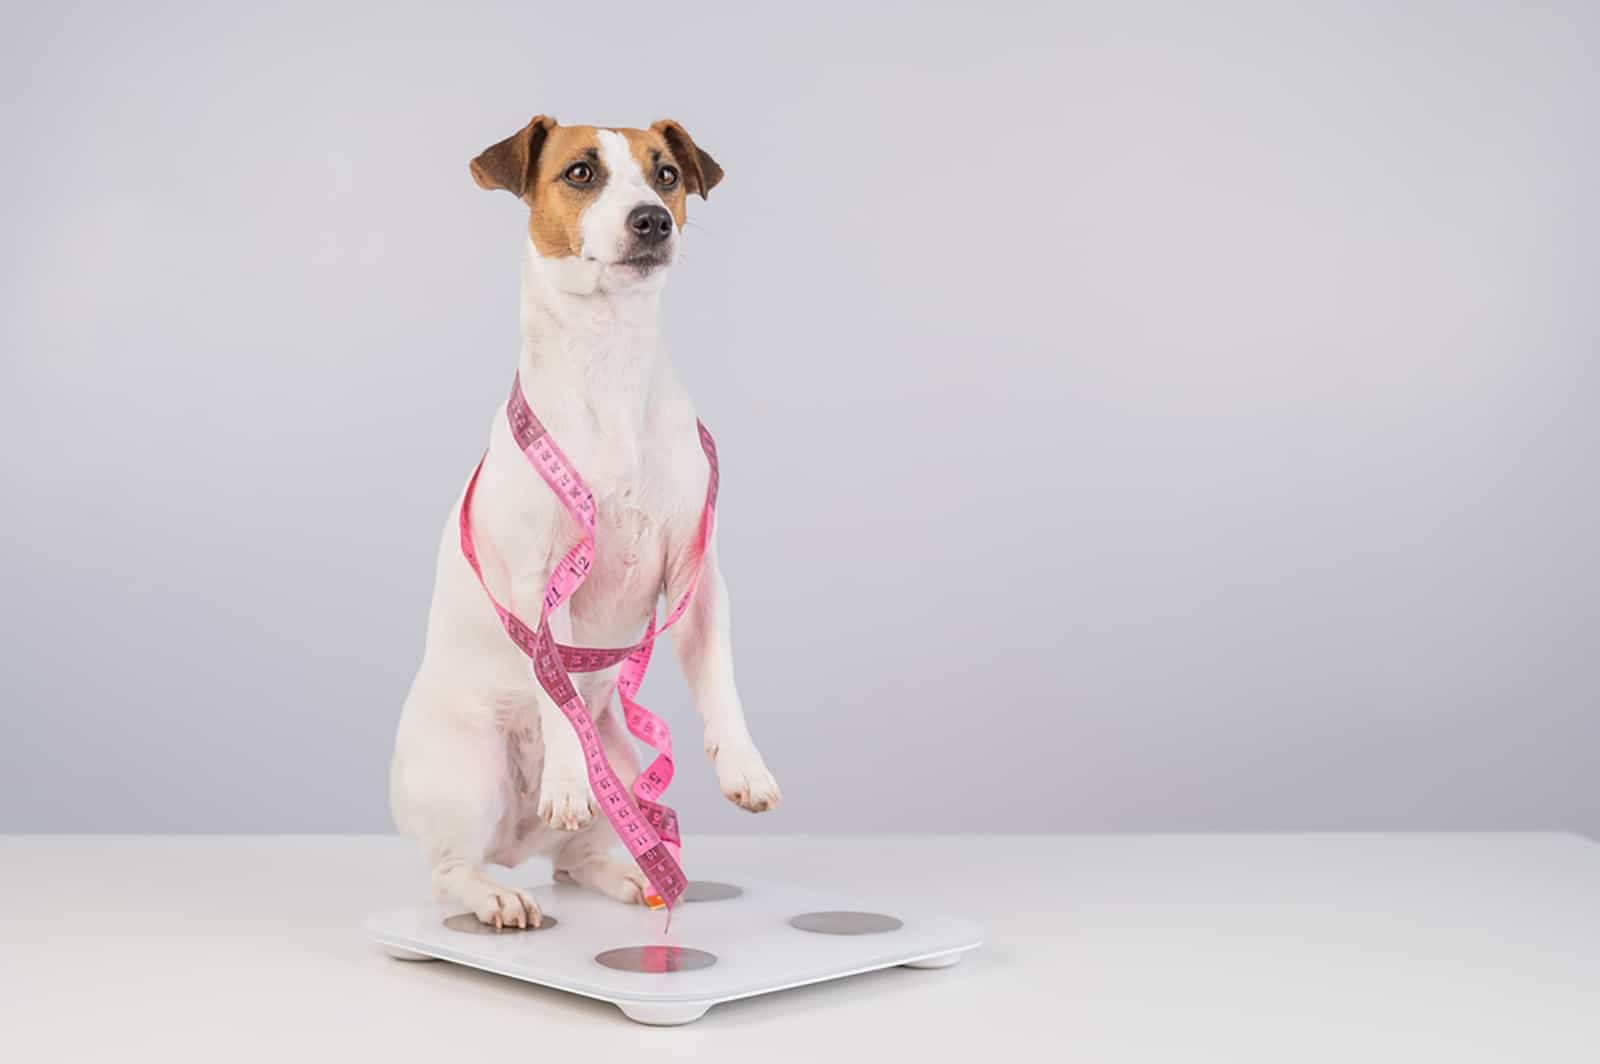 dog jack russell terrier stands on a scale with measuring tape